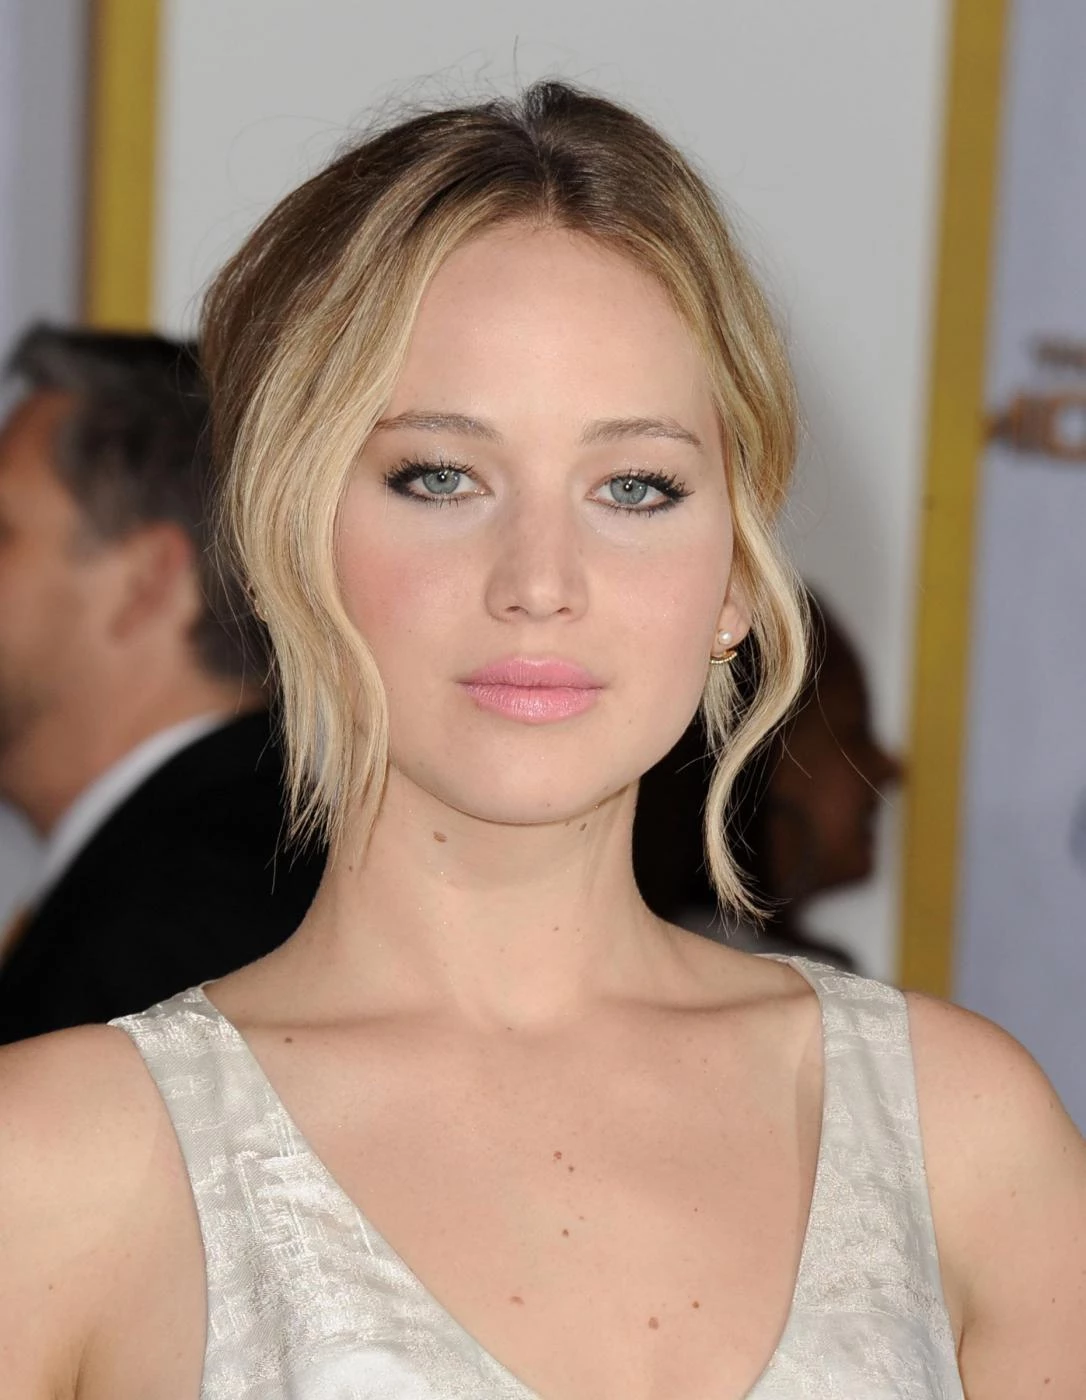 Jennifer Lawrence's Return To Her Signature Look